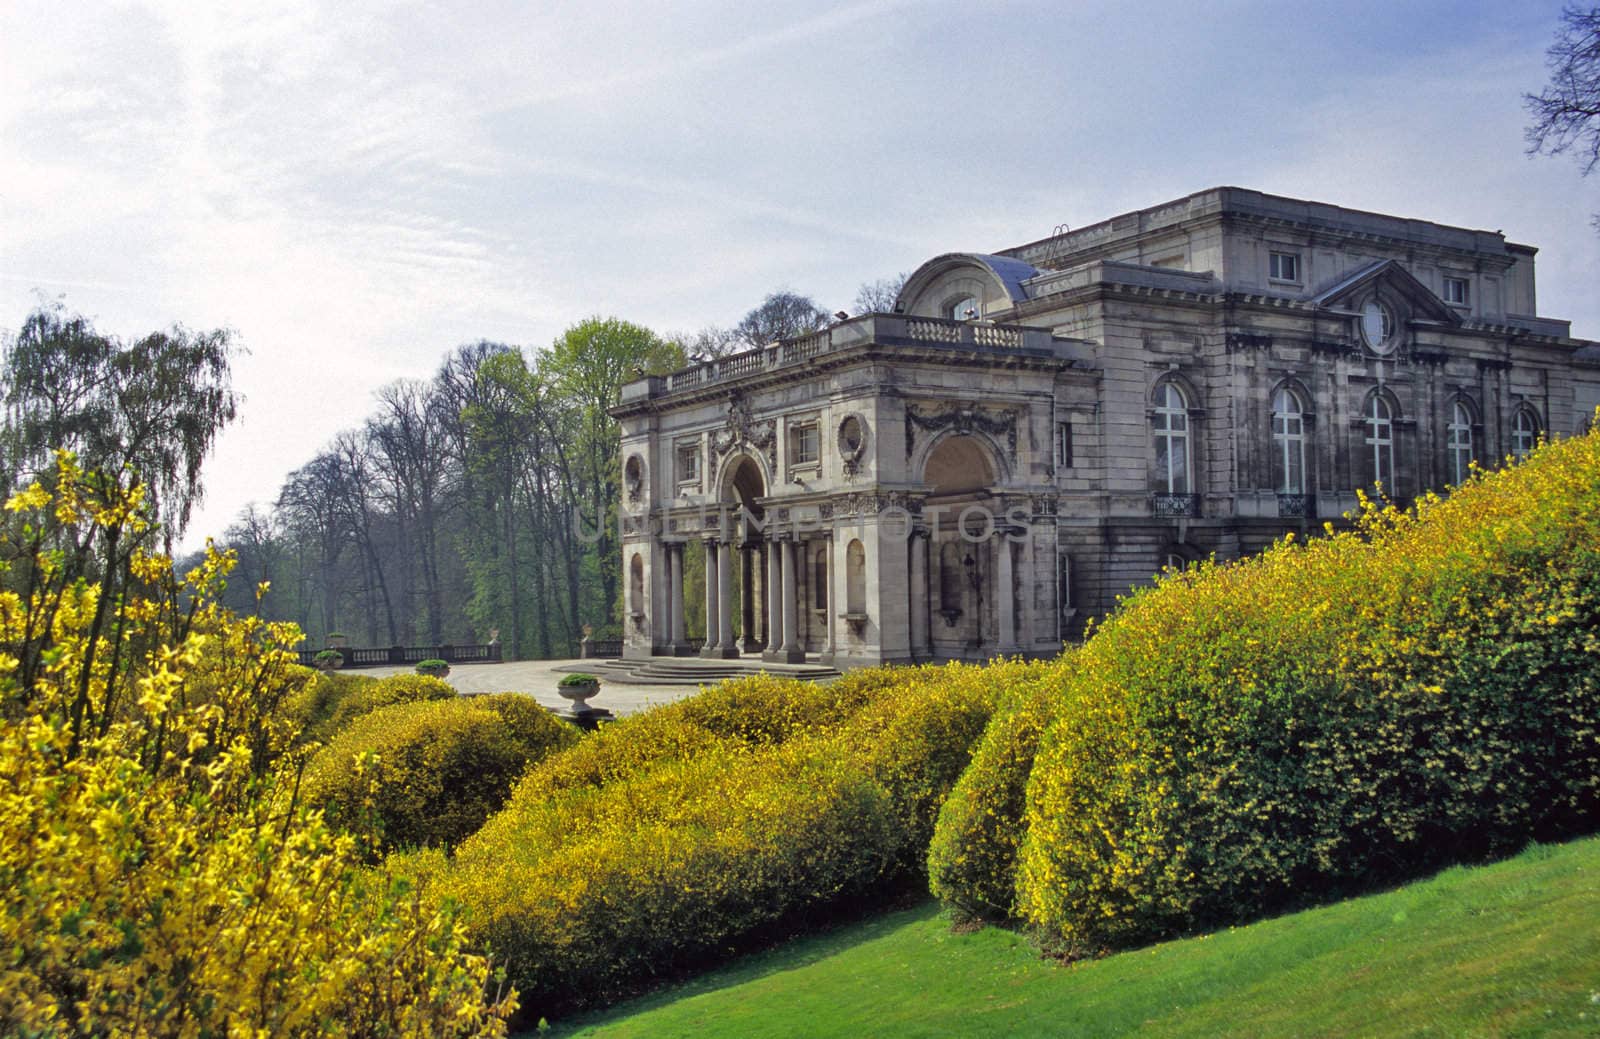 The Belgian Royal Palace in Laeken (Brussels), Belgium is surrounded by Forsythia bushes in the spring. 